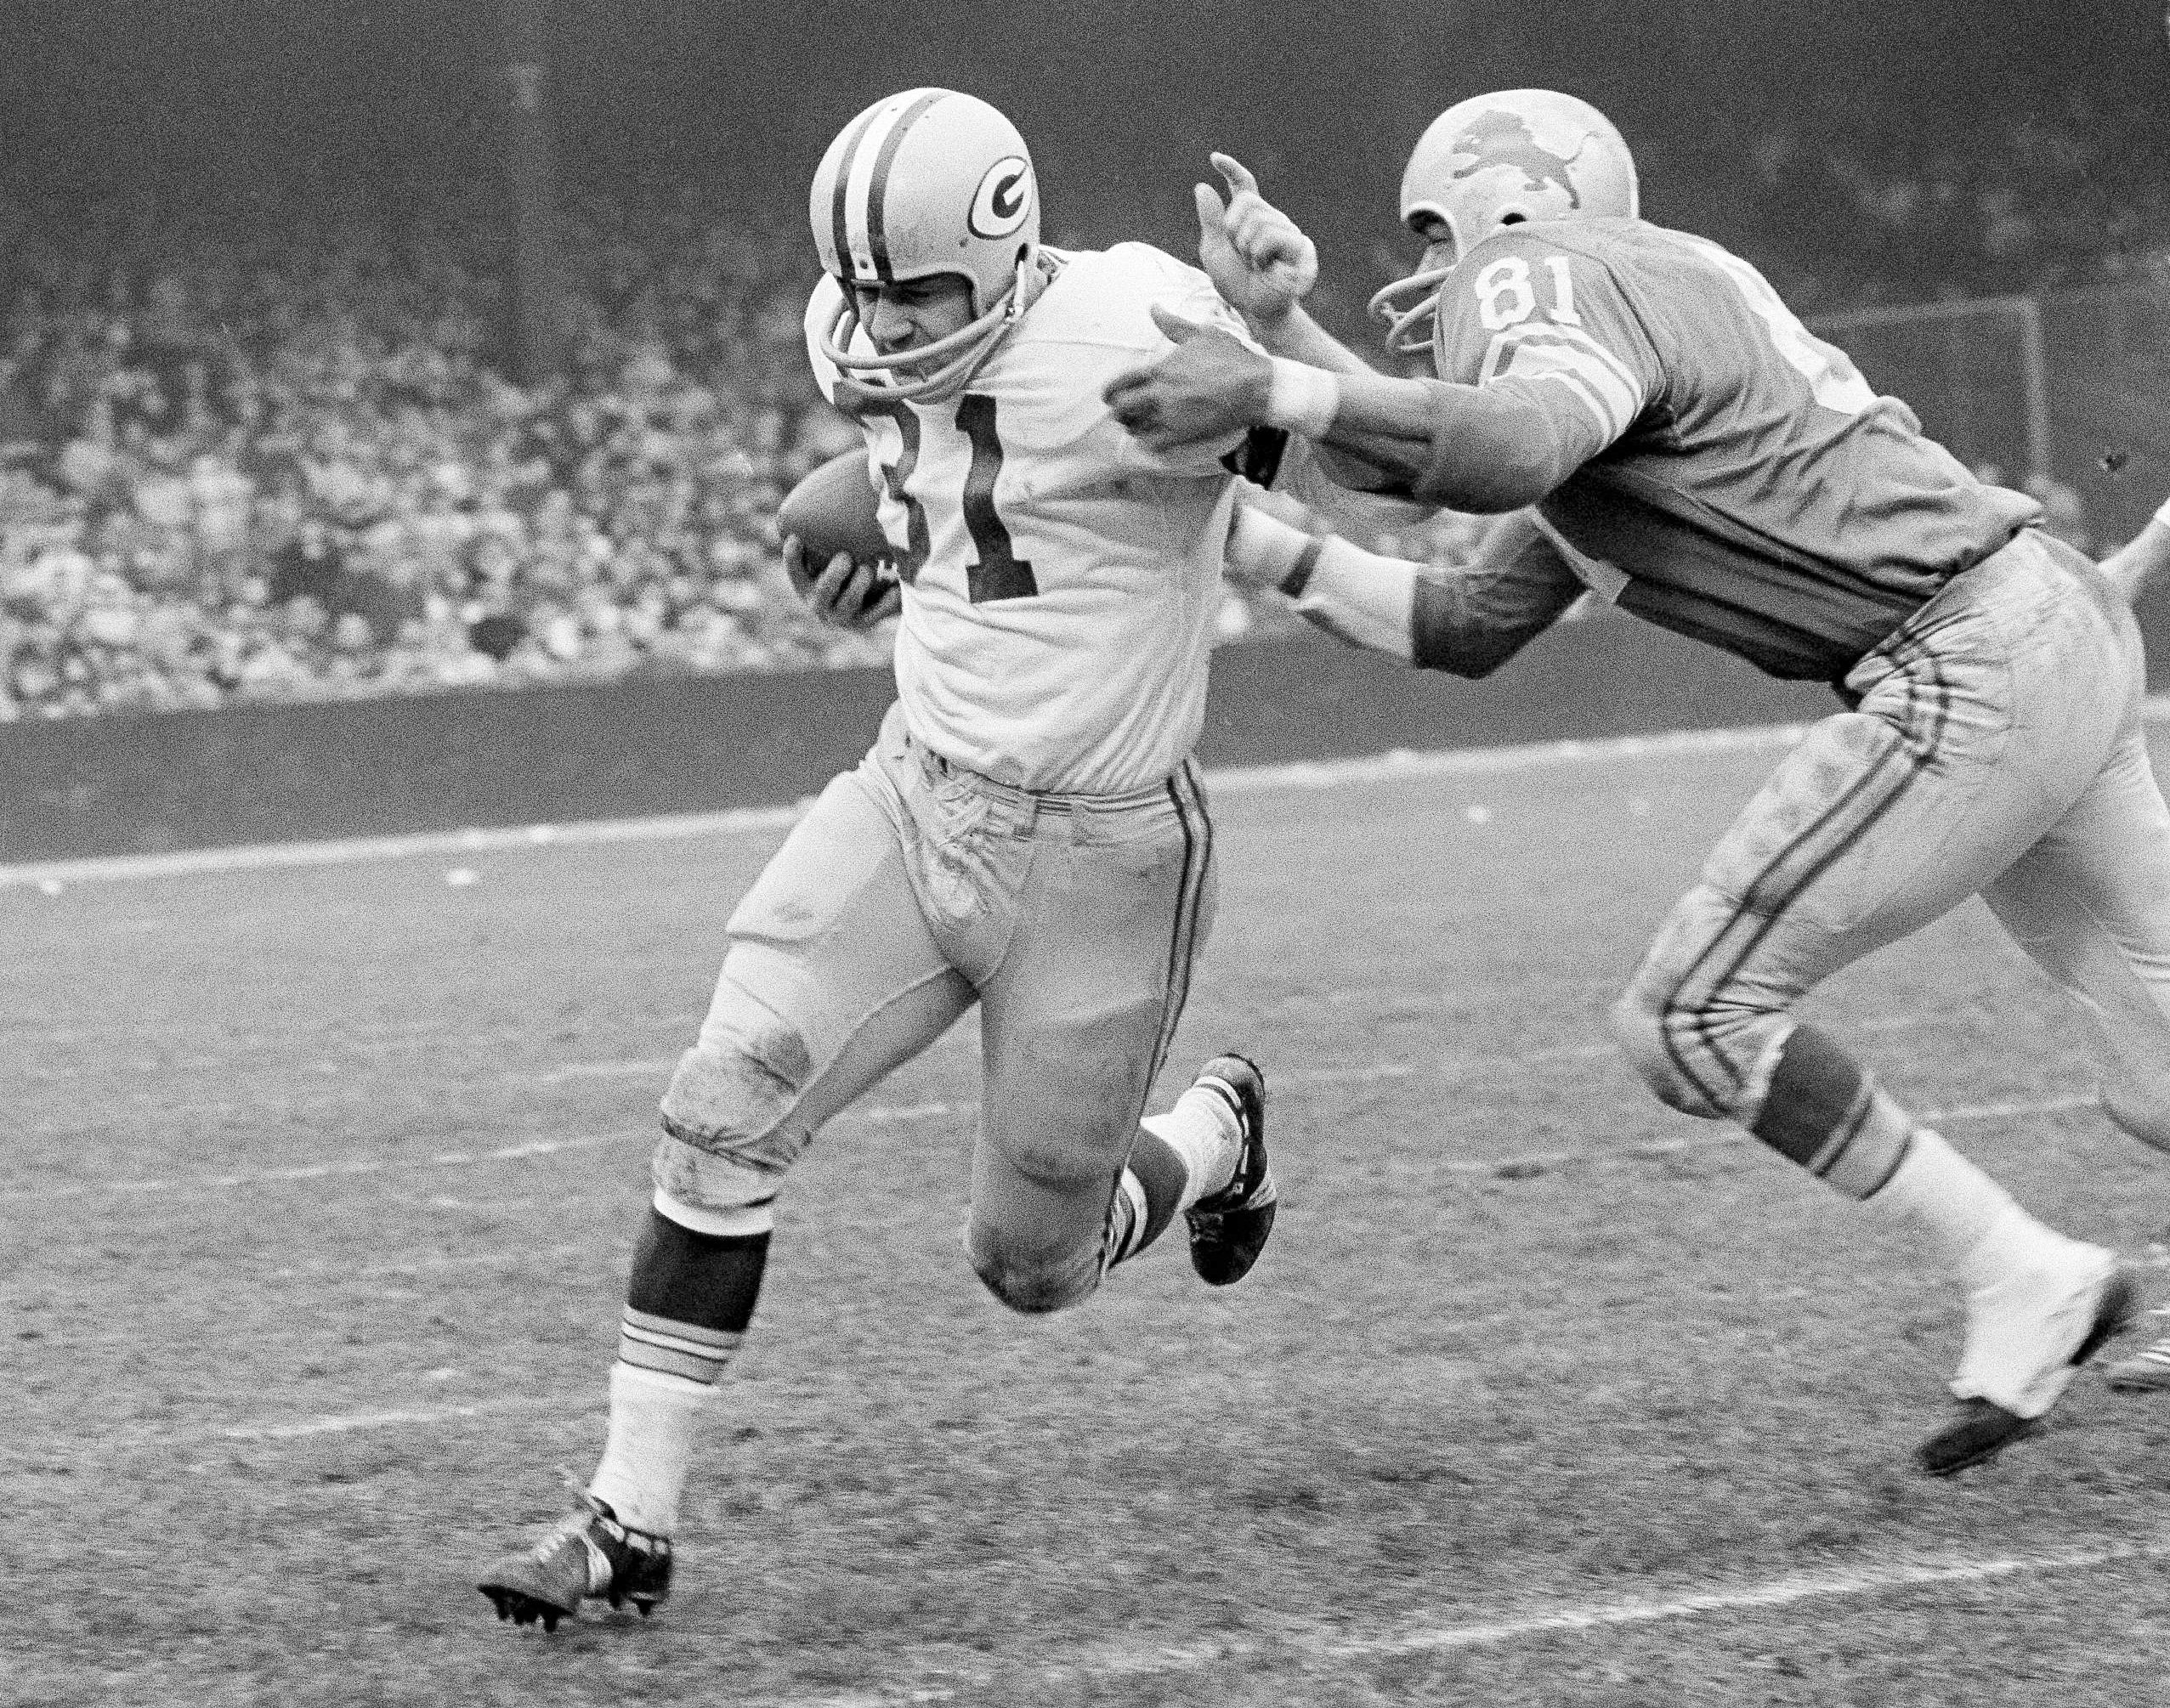 Jim Taylor, fierce fullback for mighty Packers, dies at 83